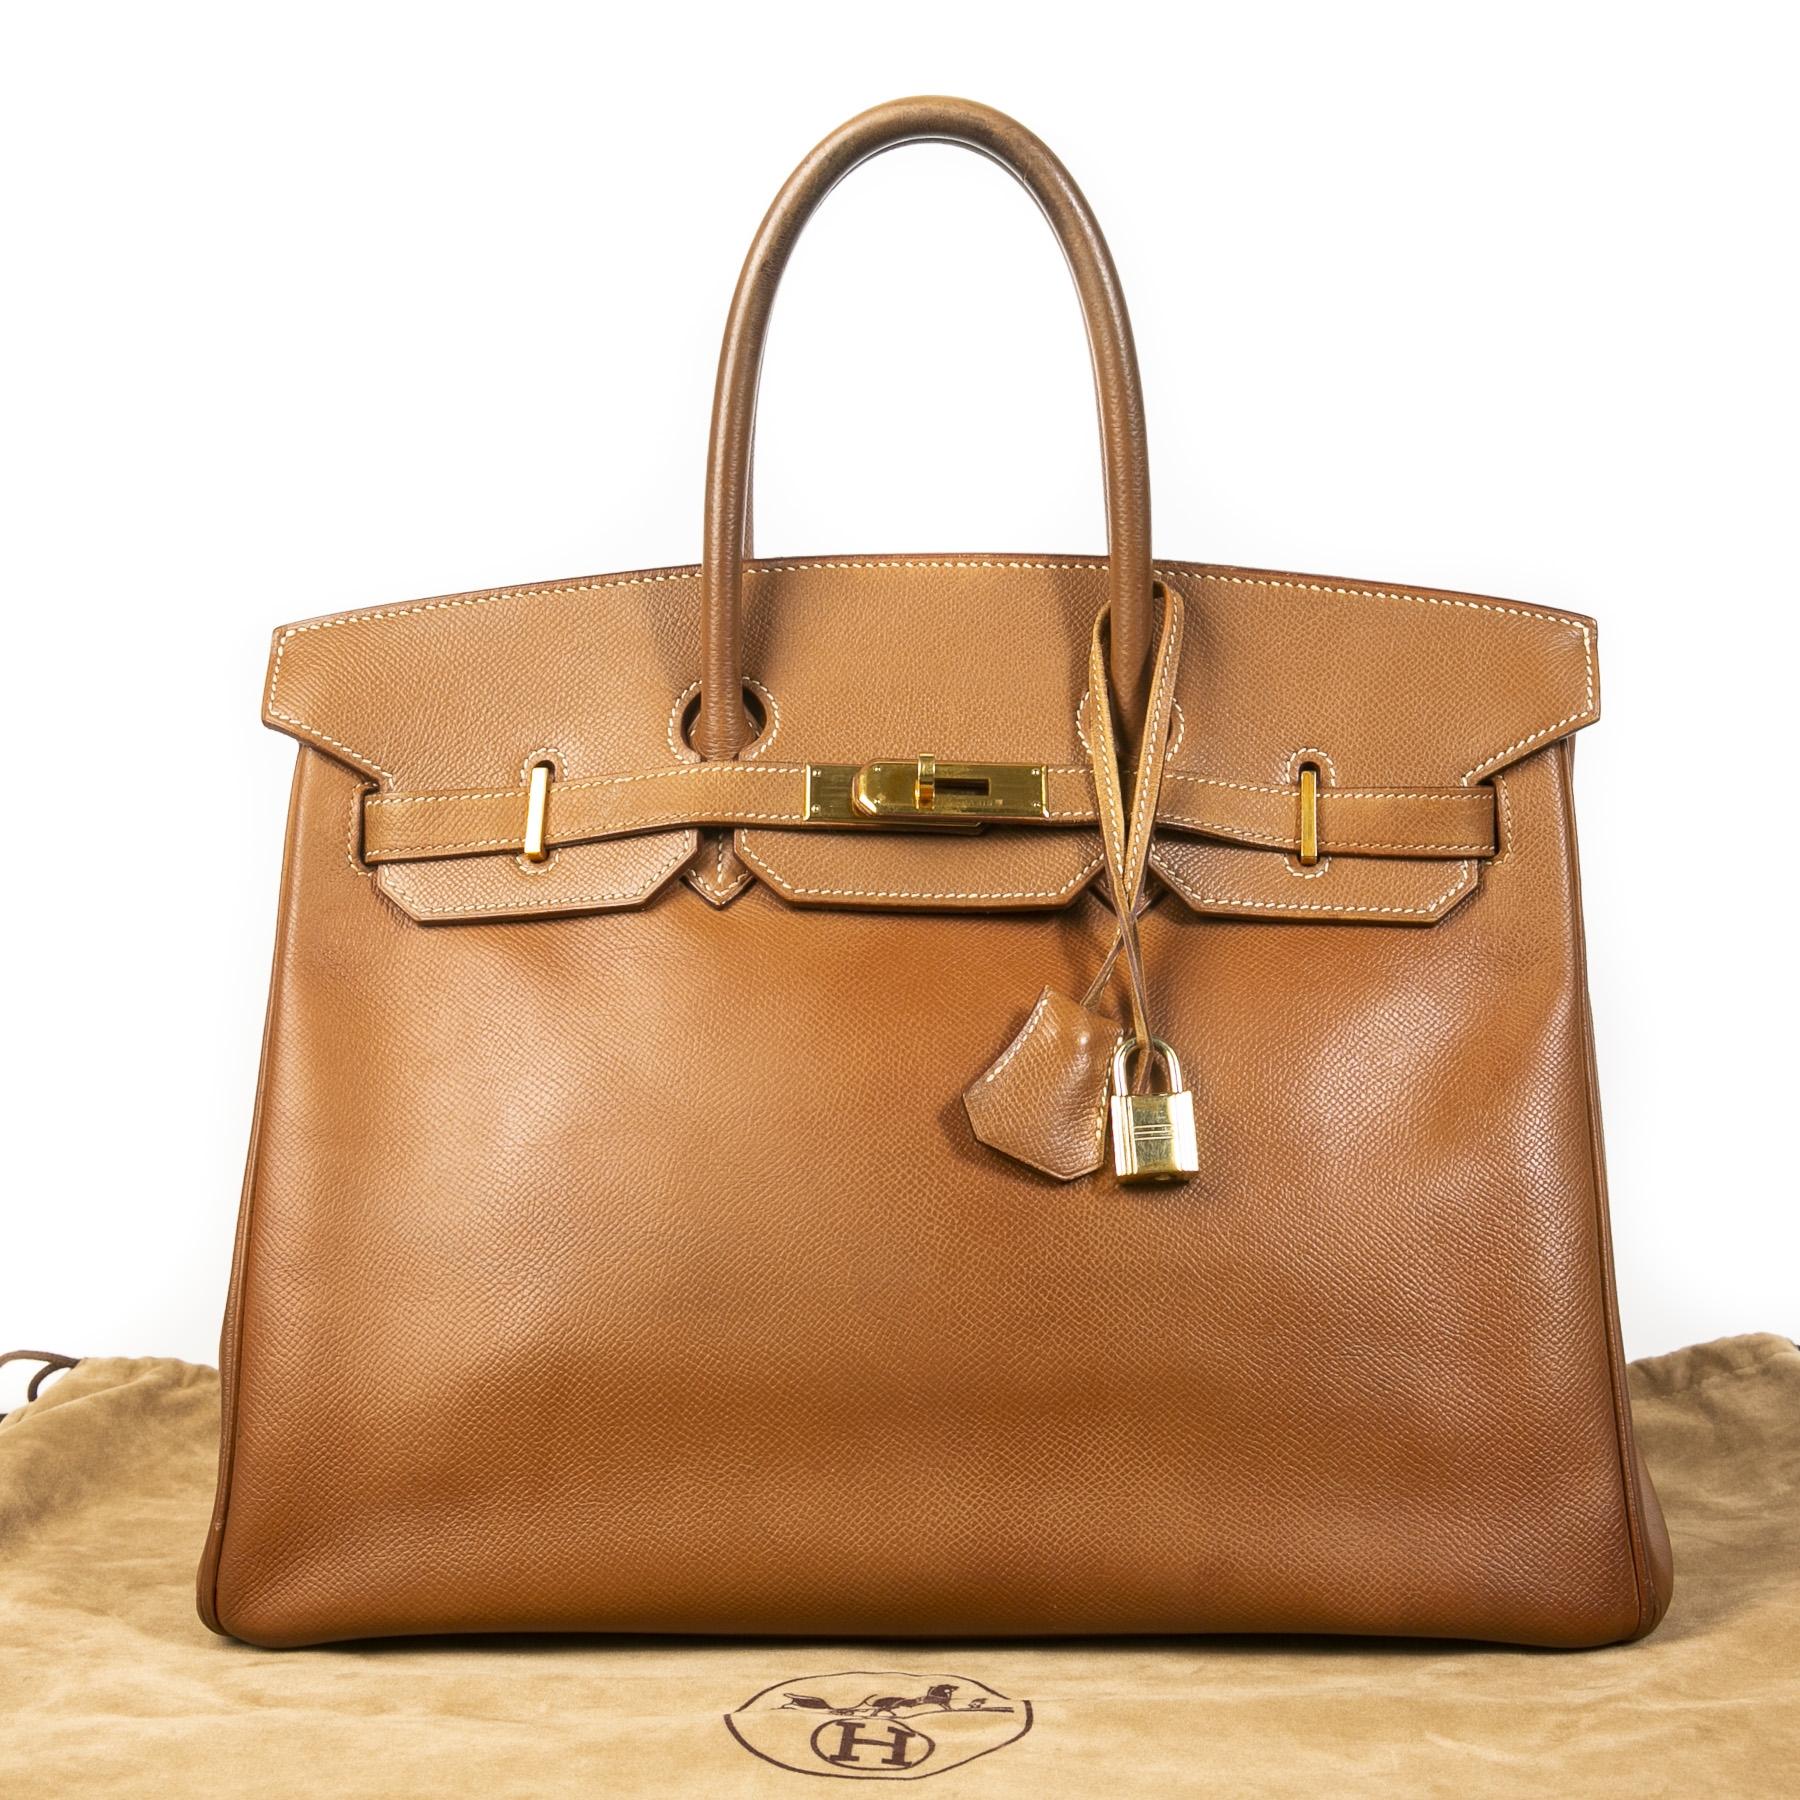 The epitome of a designer bag? The Hermès Birkin! This gorgeous bag is known all around the world as a symbol of status and class, and this preloved treasure is exactly what you need in your life. The Epsom leather holds its shape really well and